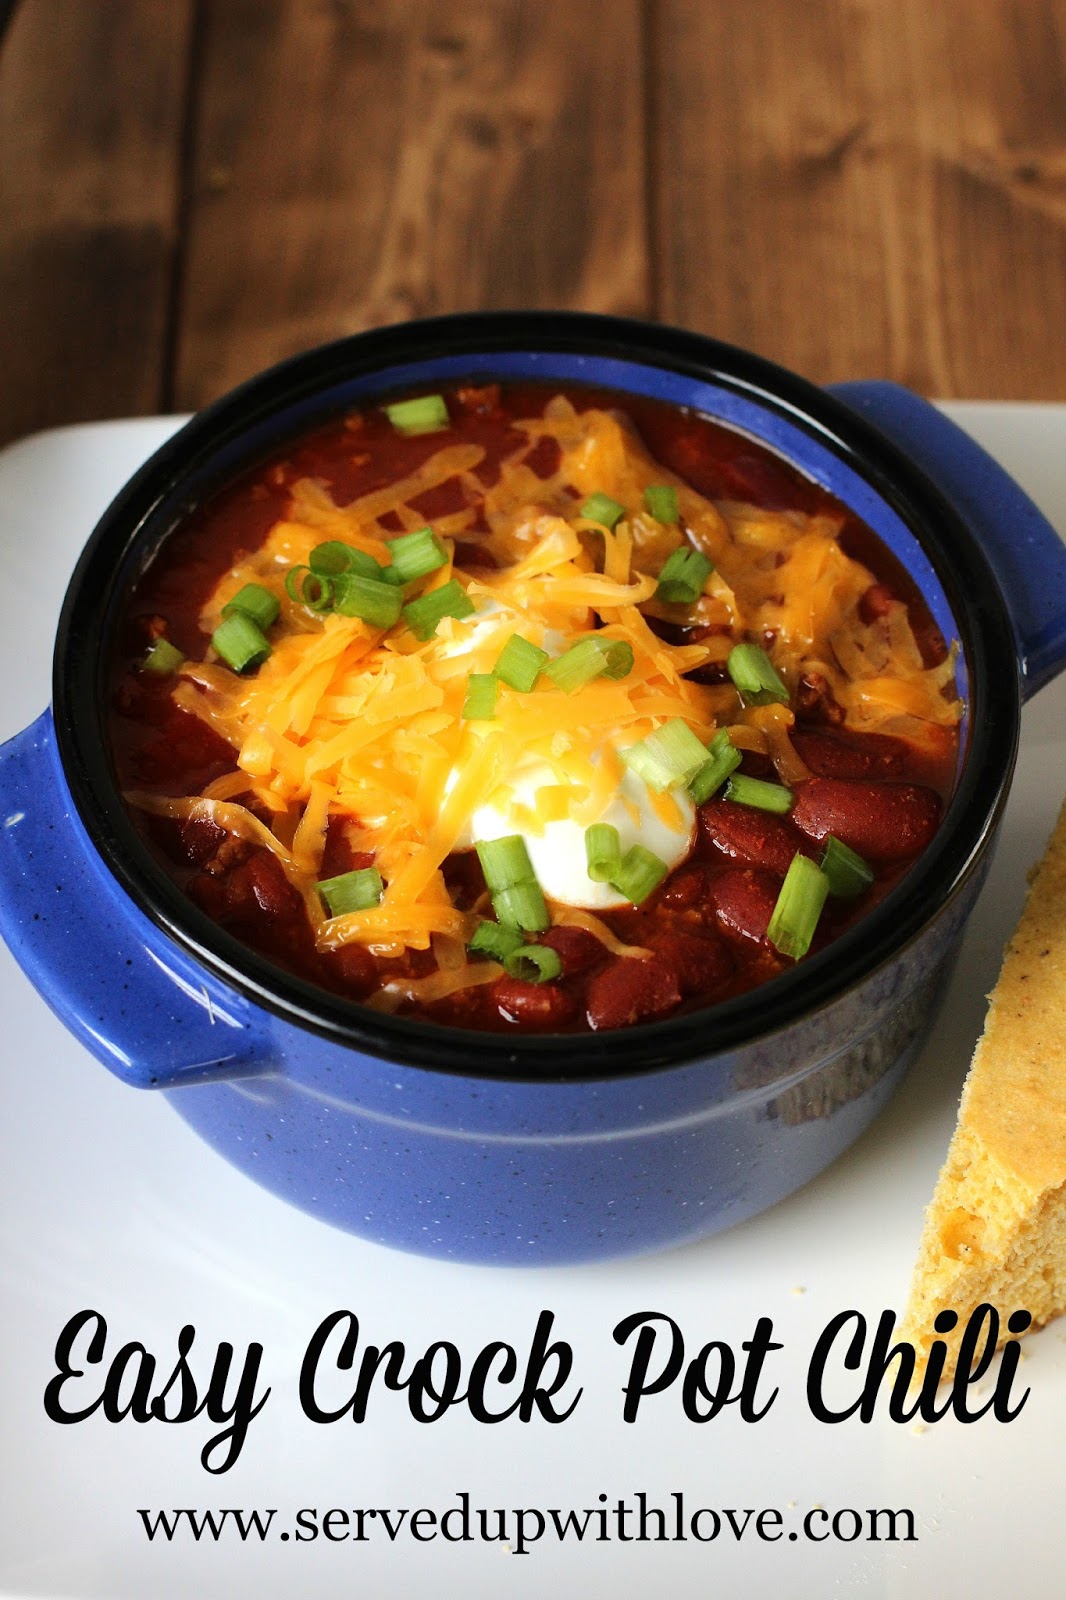 Served Up With Love: 15+ Comforting Crock Pot Chili Recipes